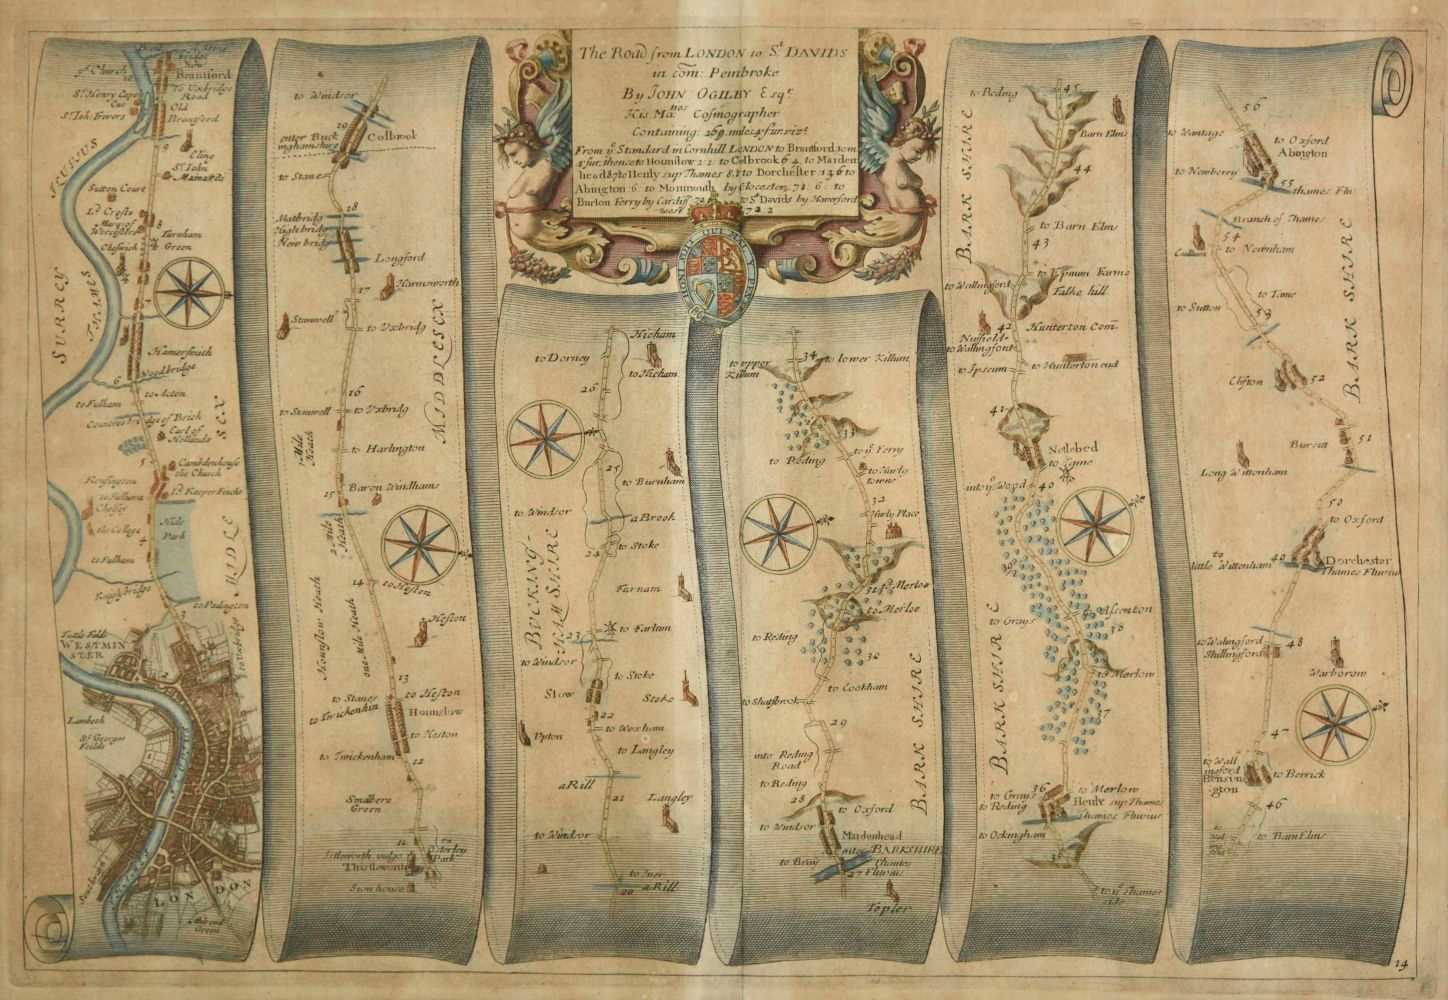 Lot 124 - Ogilby (John). The Road from London to St. Davids in com. Pembroke, circa 1698